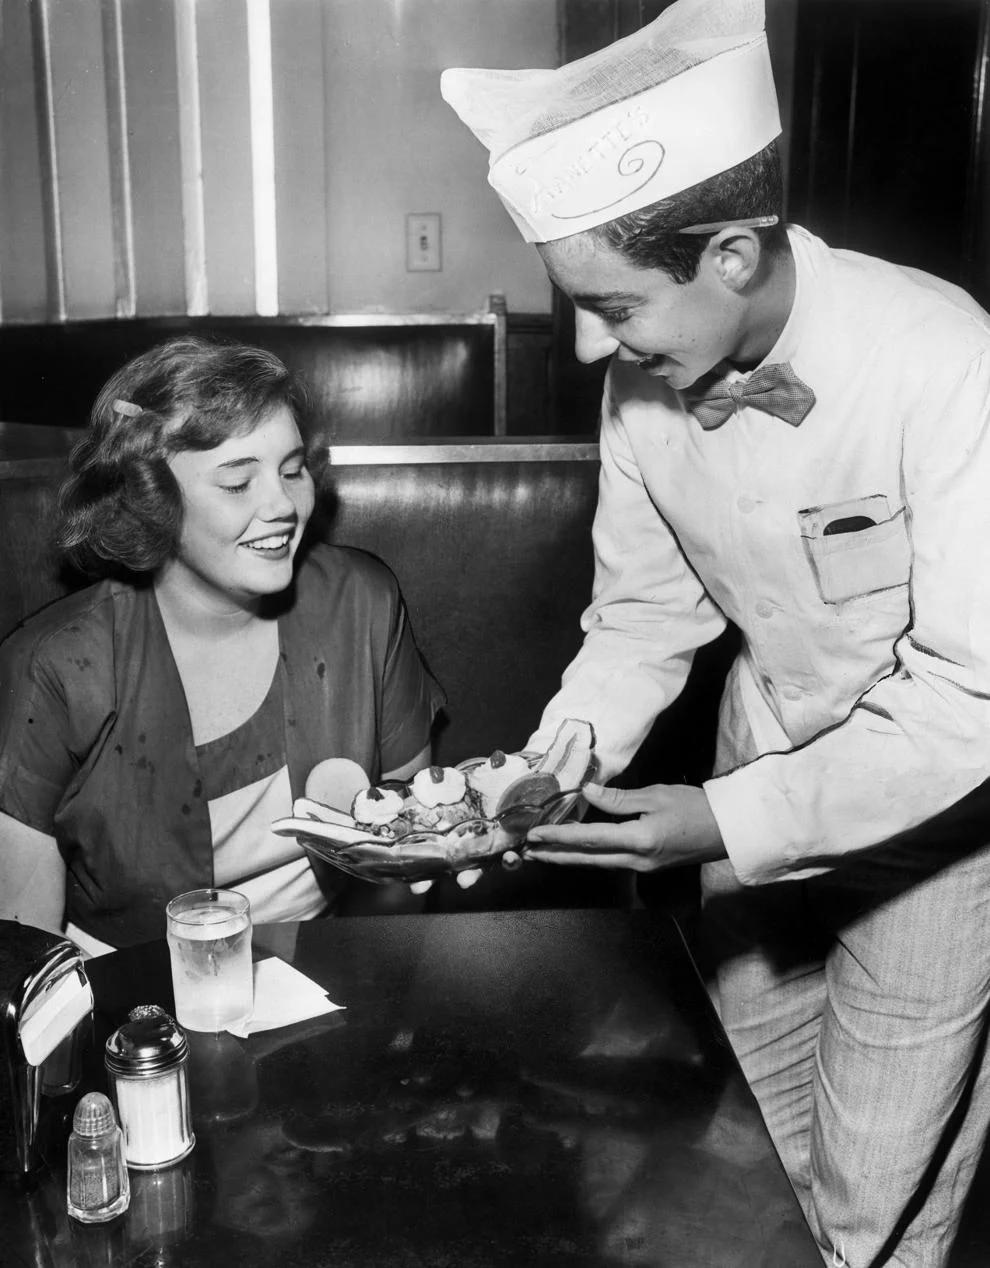 A curb boy at Arnette’s Ice Cream Co., served Beverly Page French a banana split, 1950.